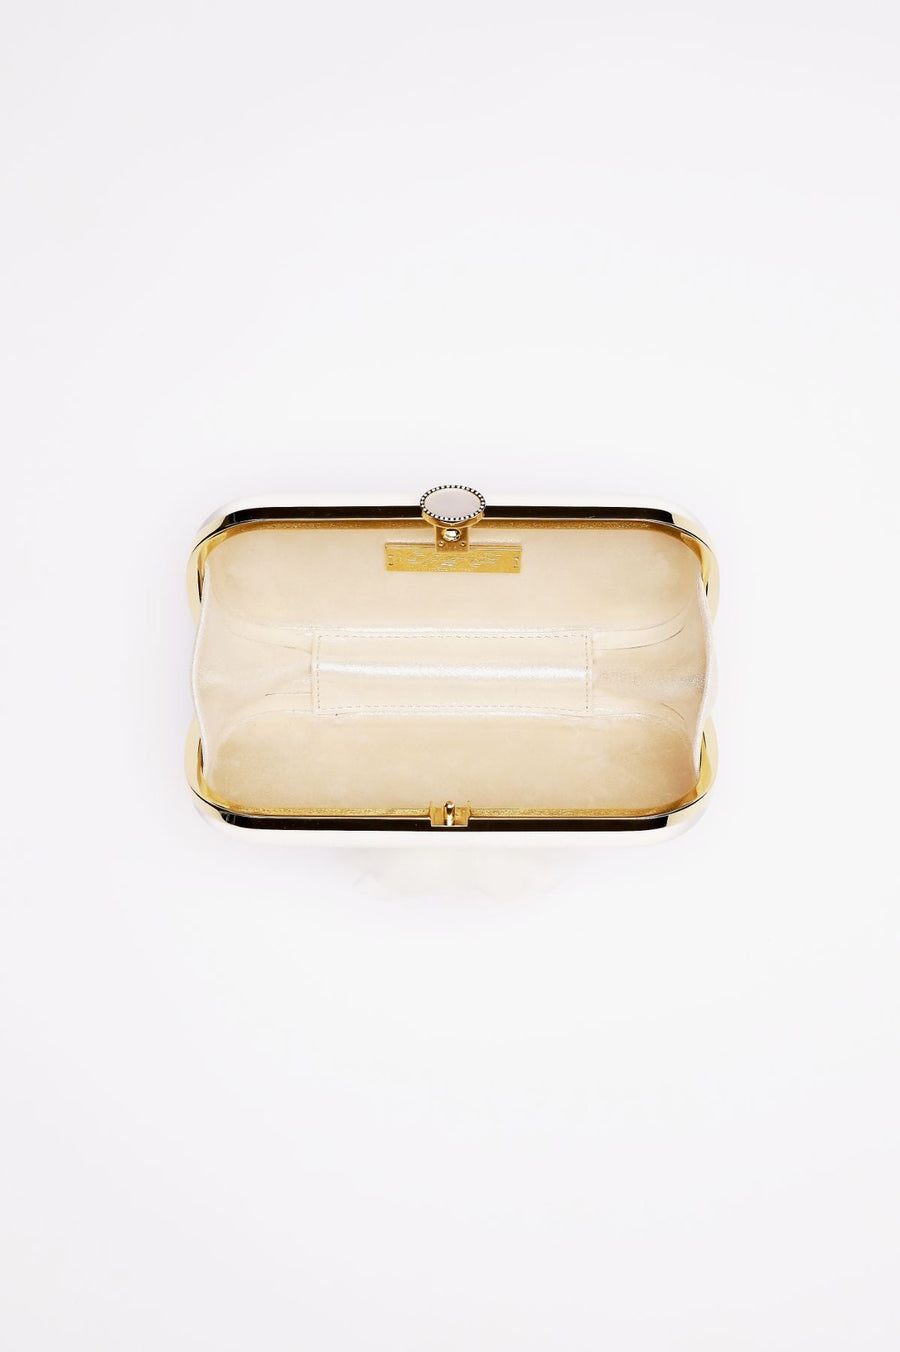 Top open view view of Ivory Bella Fiori Clutch with  Ivory organza flower with a micro pearl center and gold frame.